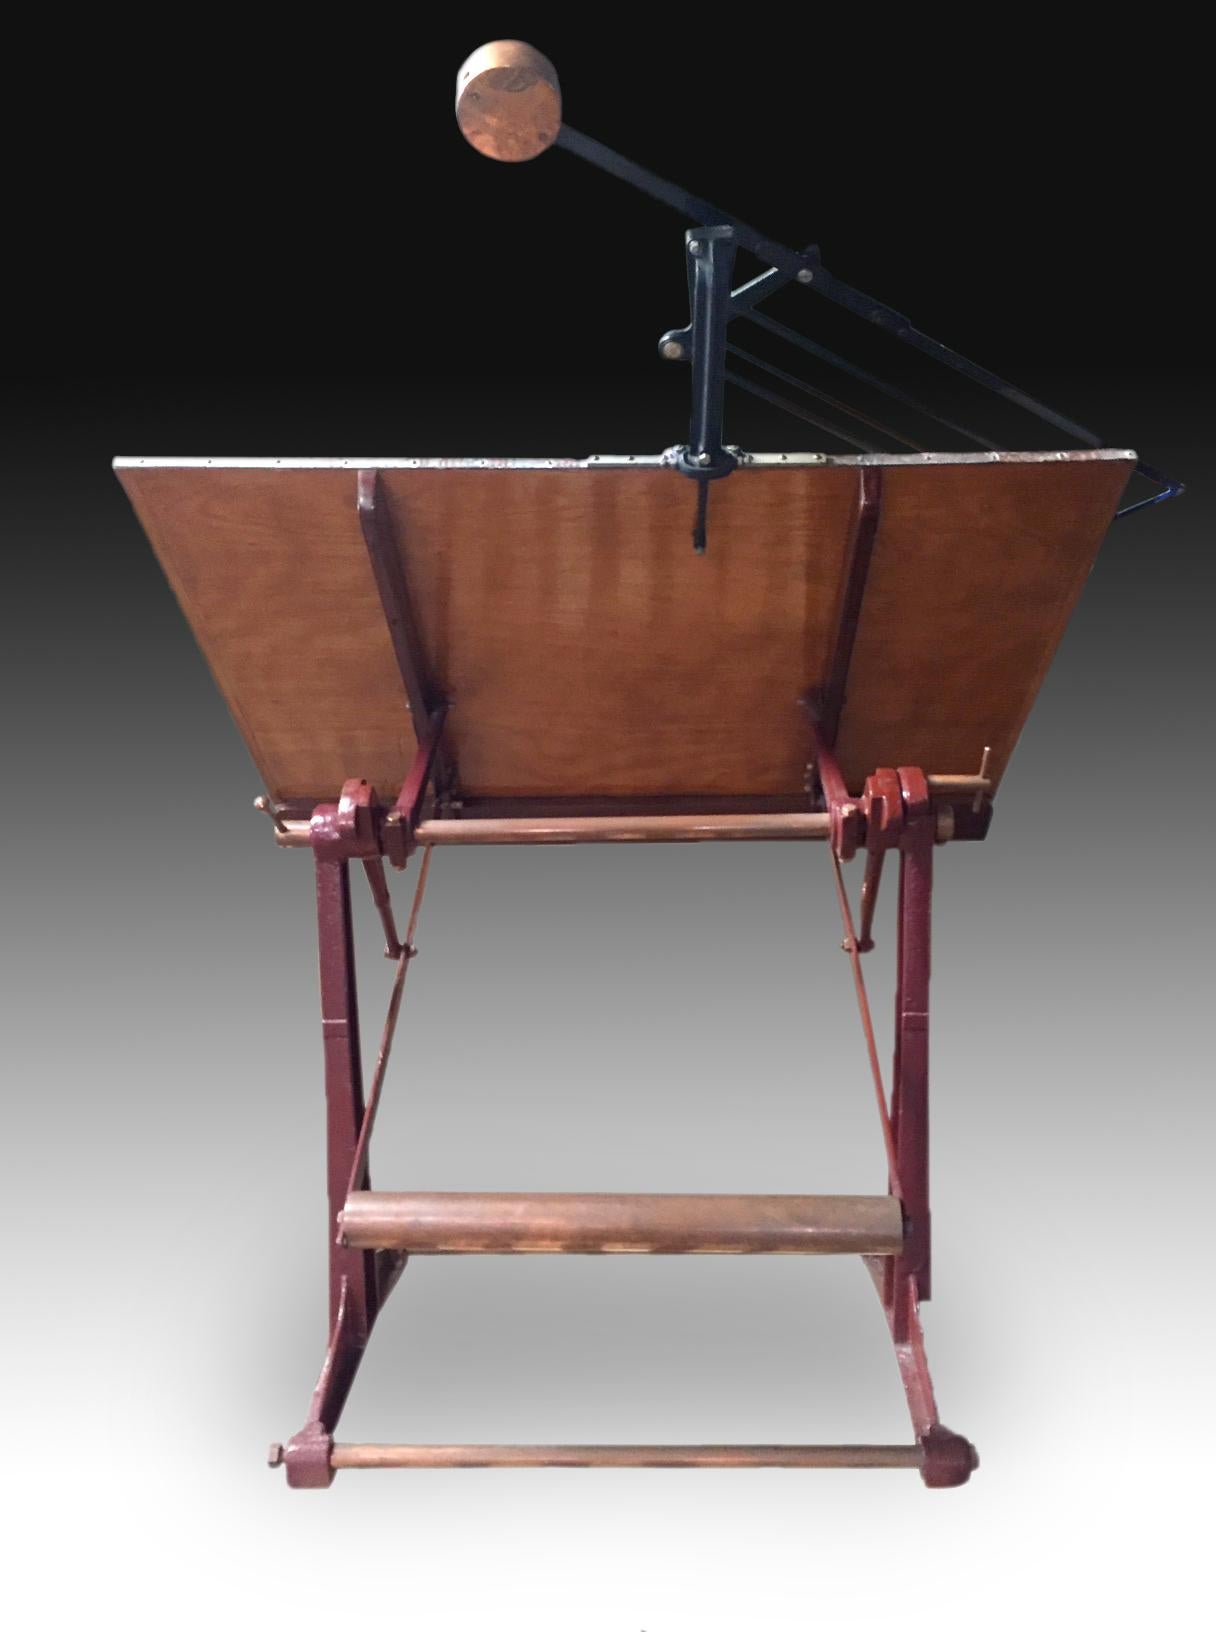 Technical drawing table or drafting table. Schmidt + Haensch, ISIS, Germany, towards the second half of the 20th century. 
The mechanic Franz Schmidt worked in a small workshop in Berlin, and the mechanic and optician Herrmann Haensch was in charge